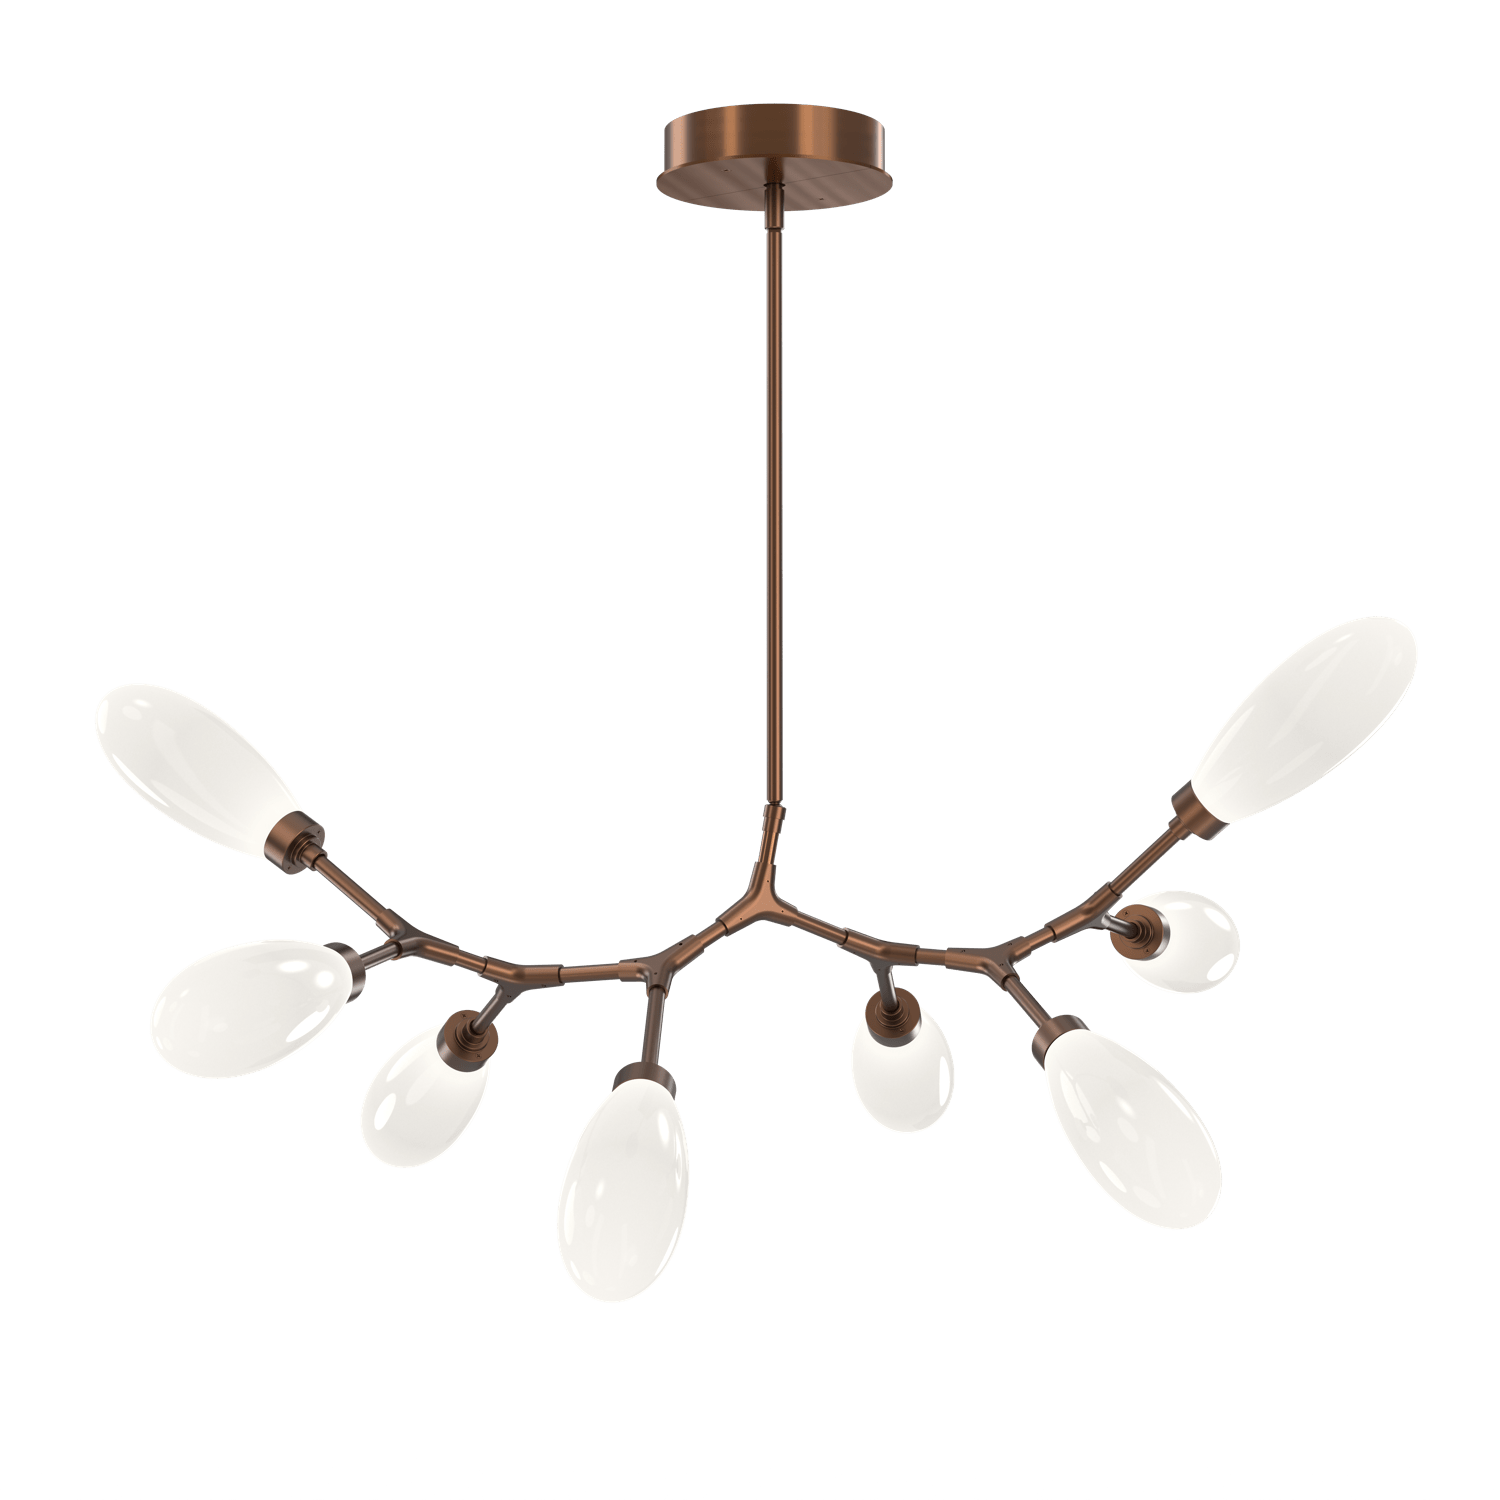 PLB0071-BB-RB-WL-LL-Hammerton-Studio-Fiori-8-light-organic-branch-chandelier-with-oil-rubbed-bronze-finish-and-opal-white-glass-shades-and-LED-lamping